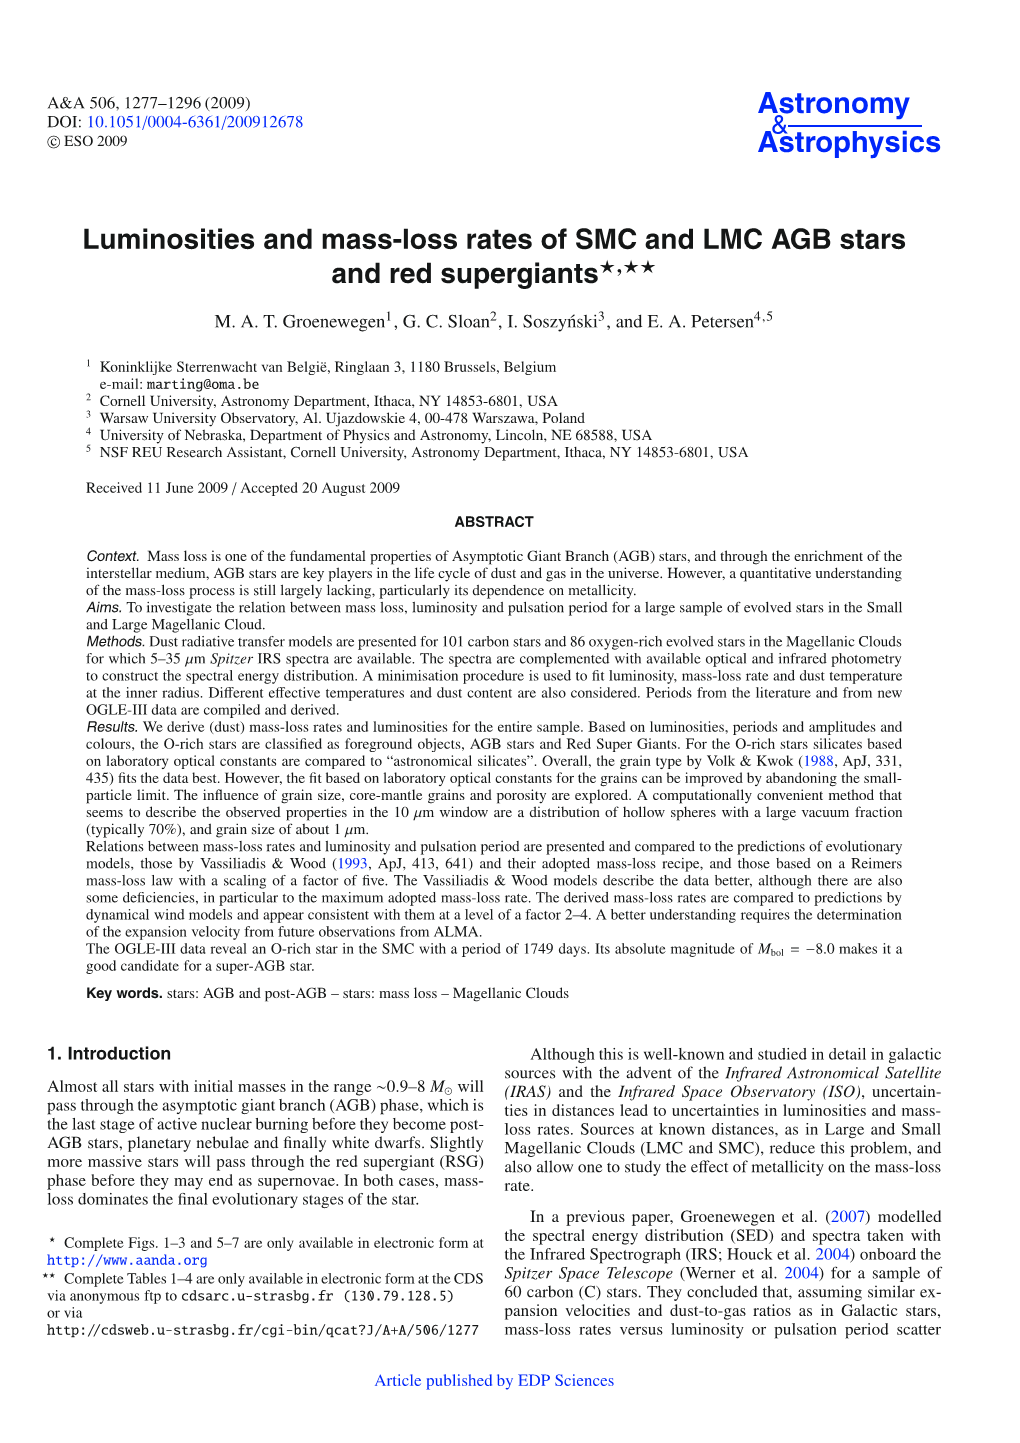 Luminosities and Mass-Loss Rates of SMC and LMC AGB Stars and Red Supergiants�,